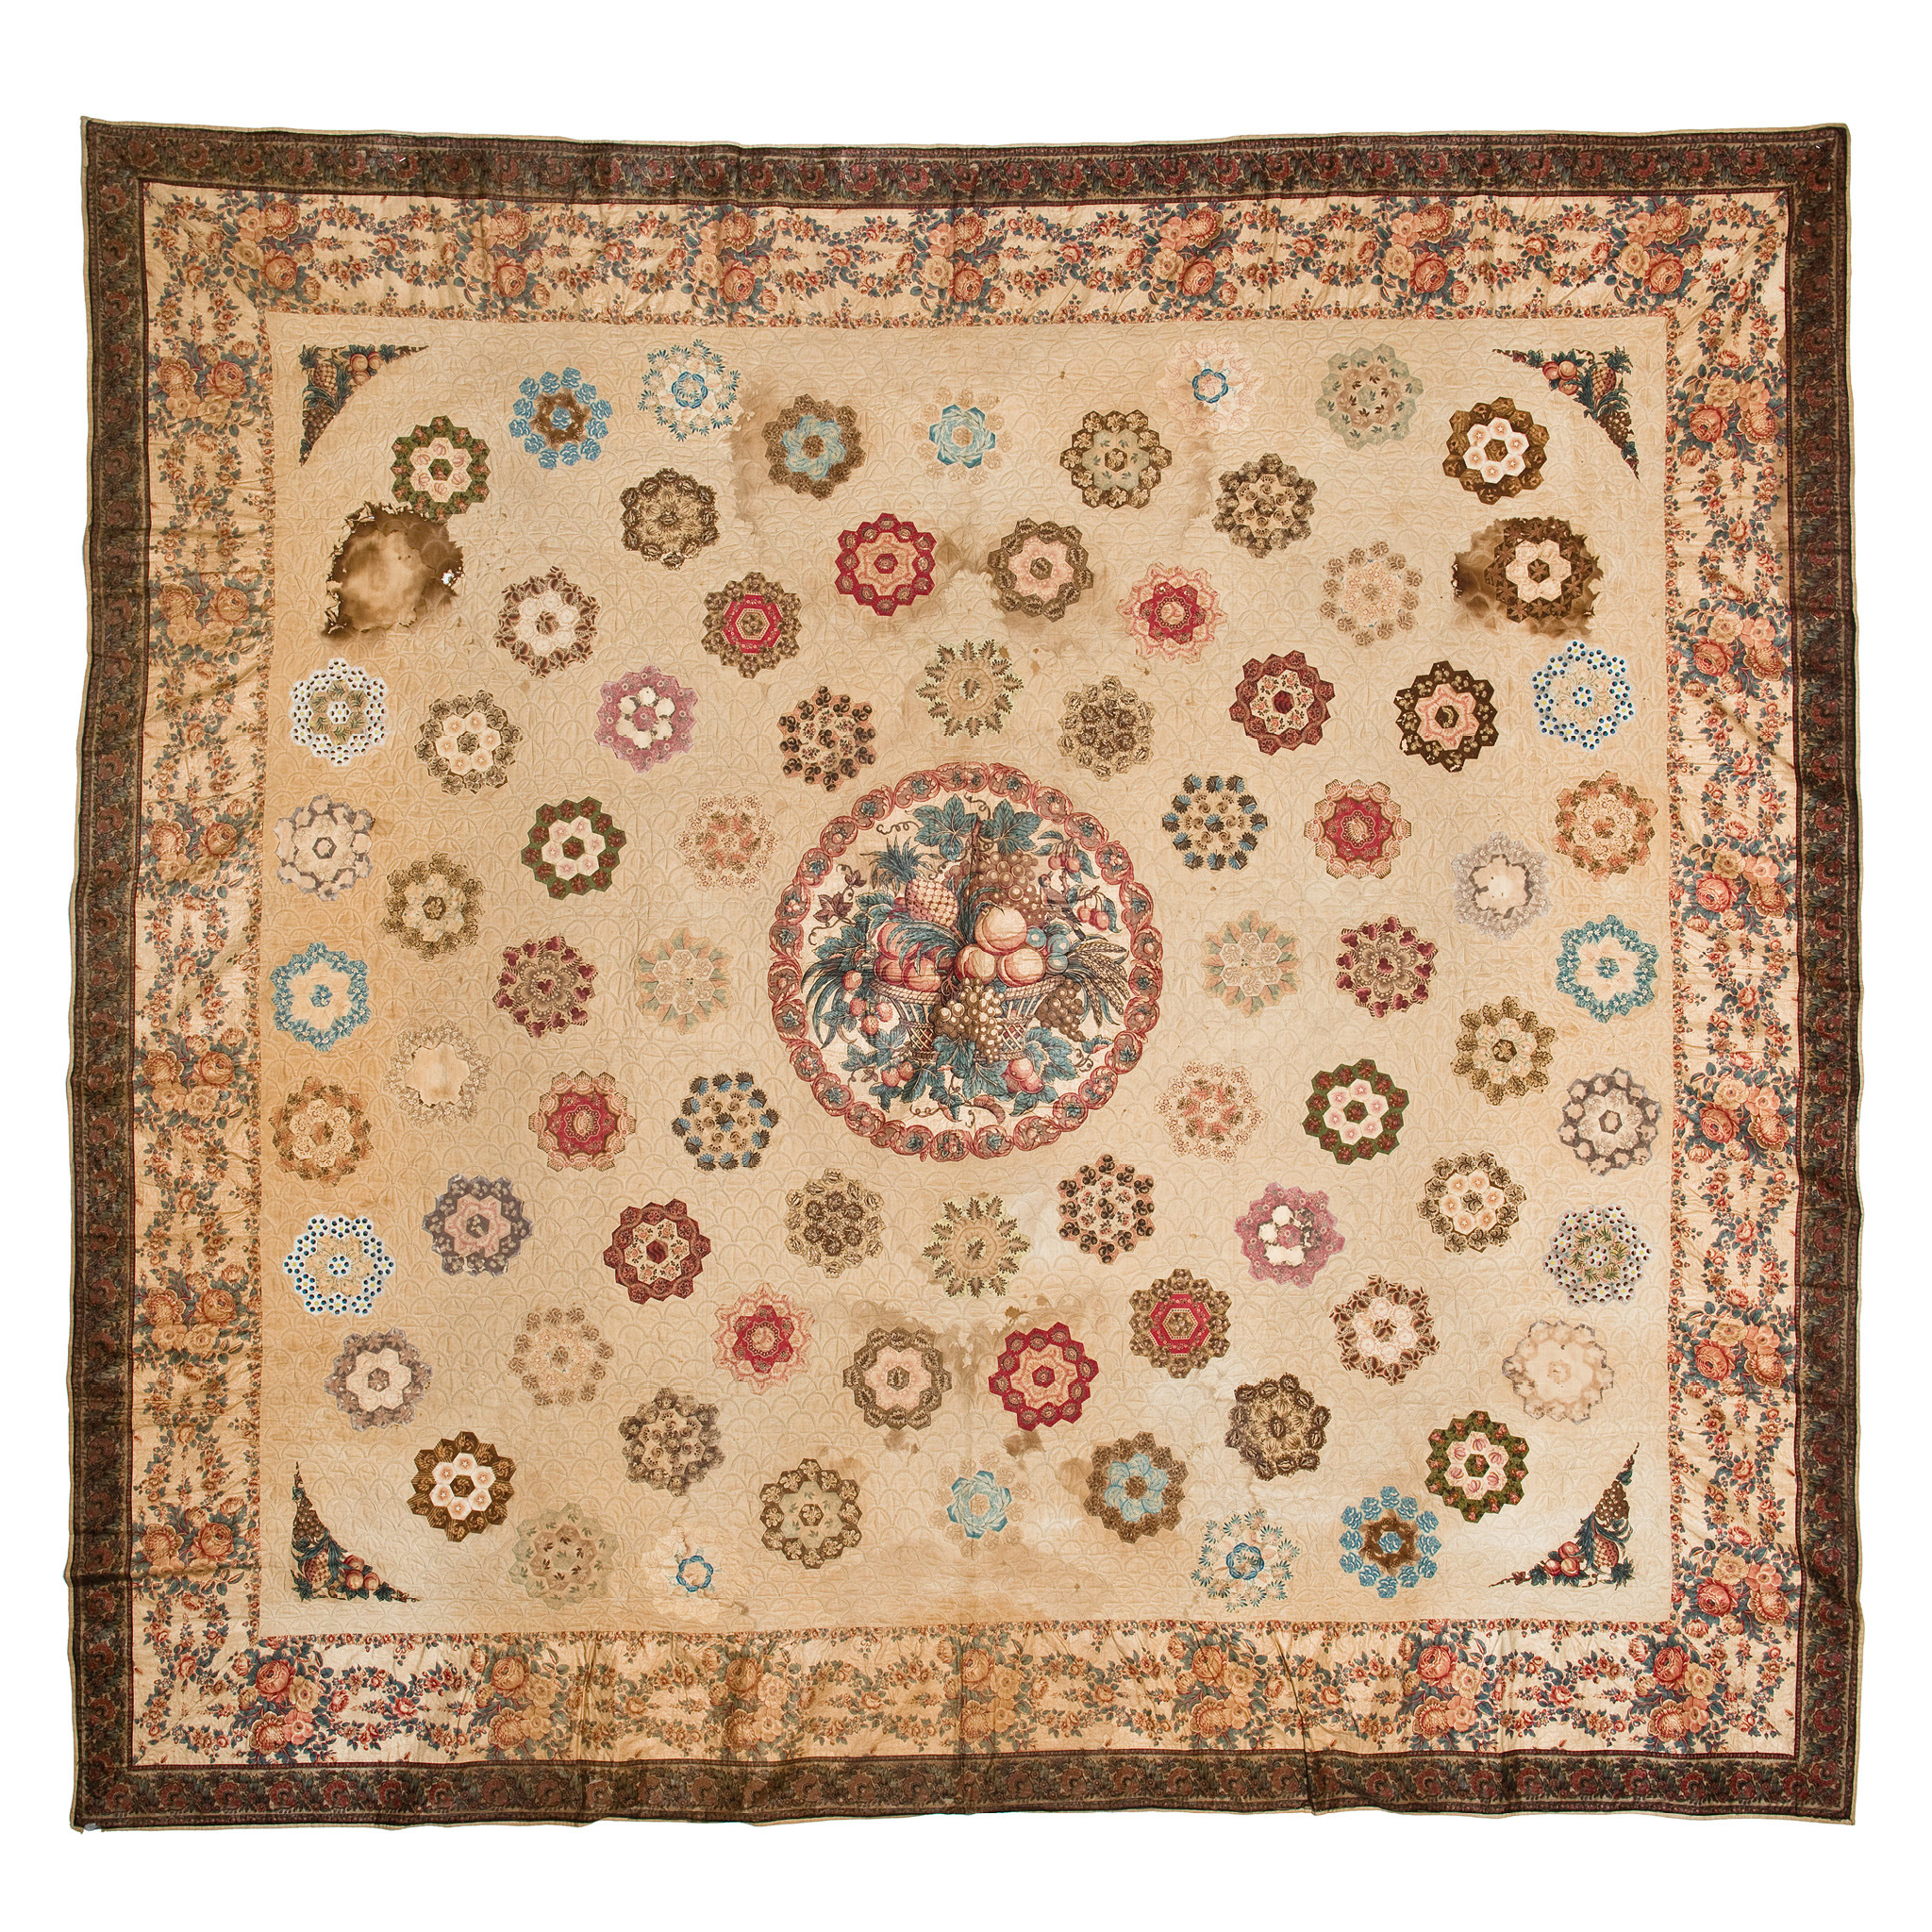 Appliqué and Mosaic Quilt, c. 1829<br> Designed by Catherine Osborn Barnwell (1809 - 1886)<br> Quilted by enslaved people, possibly Charlotte and Doll<br> <i>Gift of Mrs. I. K. Heyward, 1942</i><br>